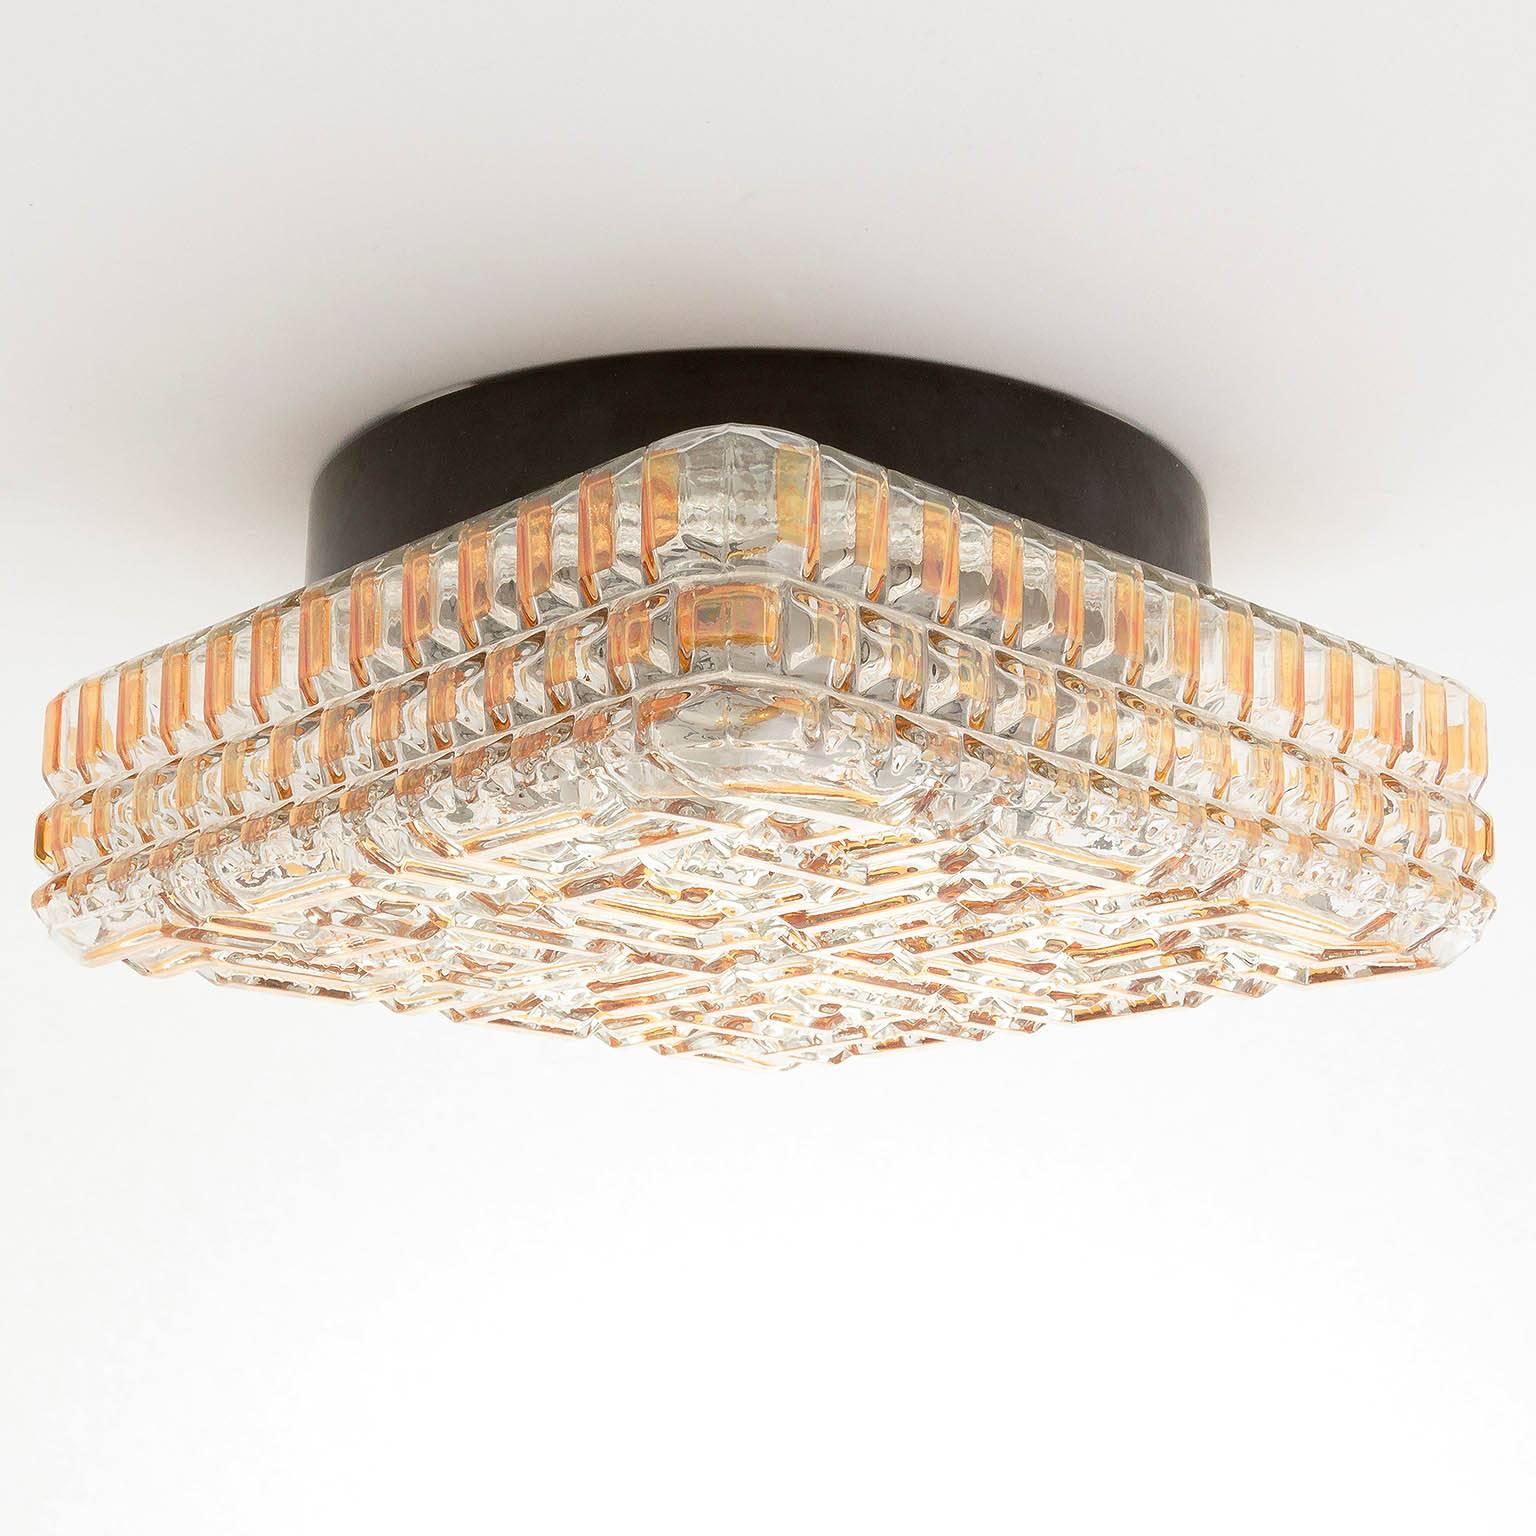 A square and unusual light fixture in the style of Glashütte Limburg, manufactured in Germany in Mid-Century, ca. 1970. A clear textured glass with geometrical patterns with orange or amber tone painting. An original vintage piece in excellent